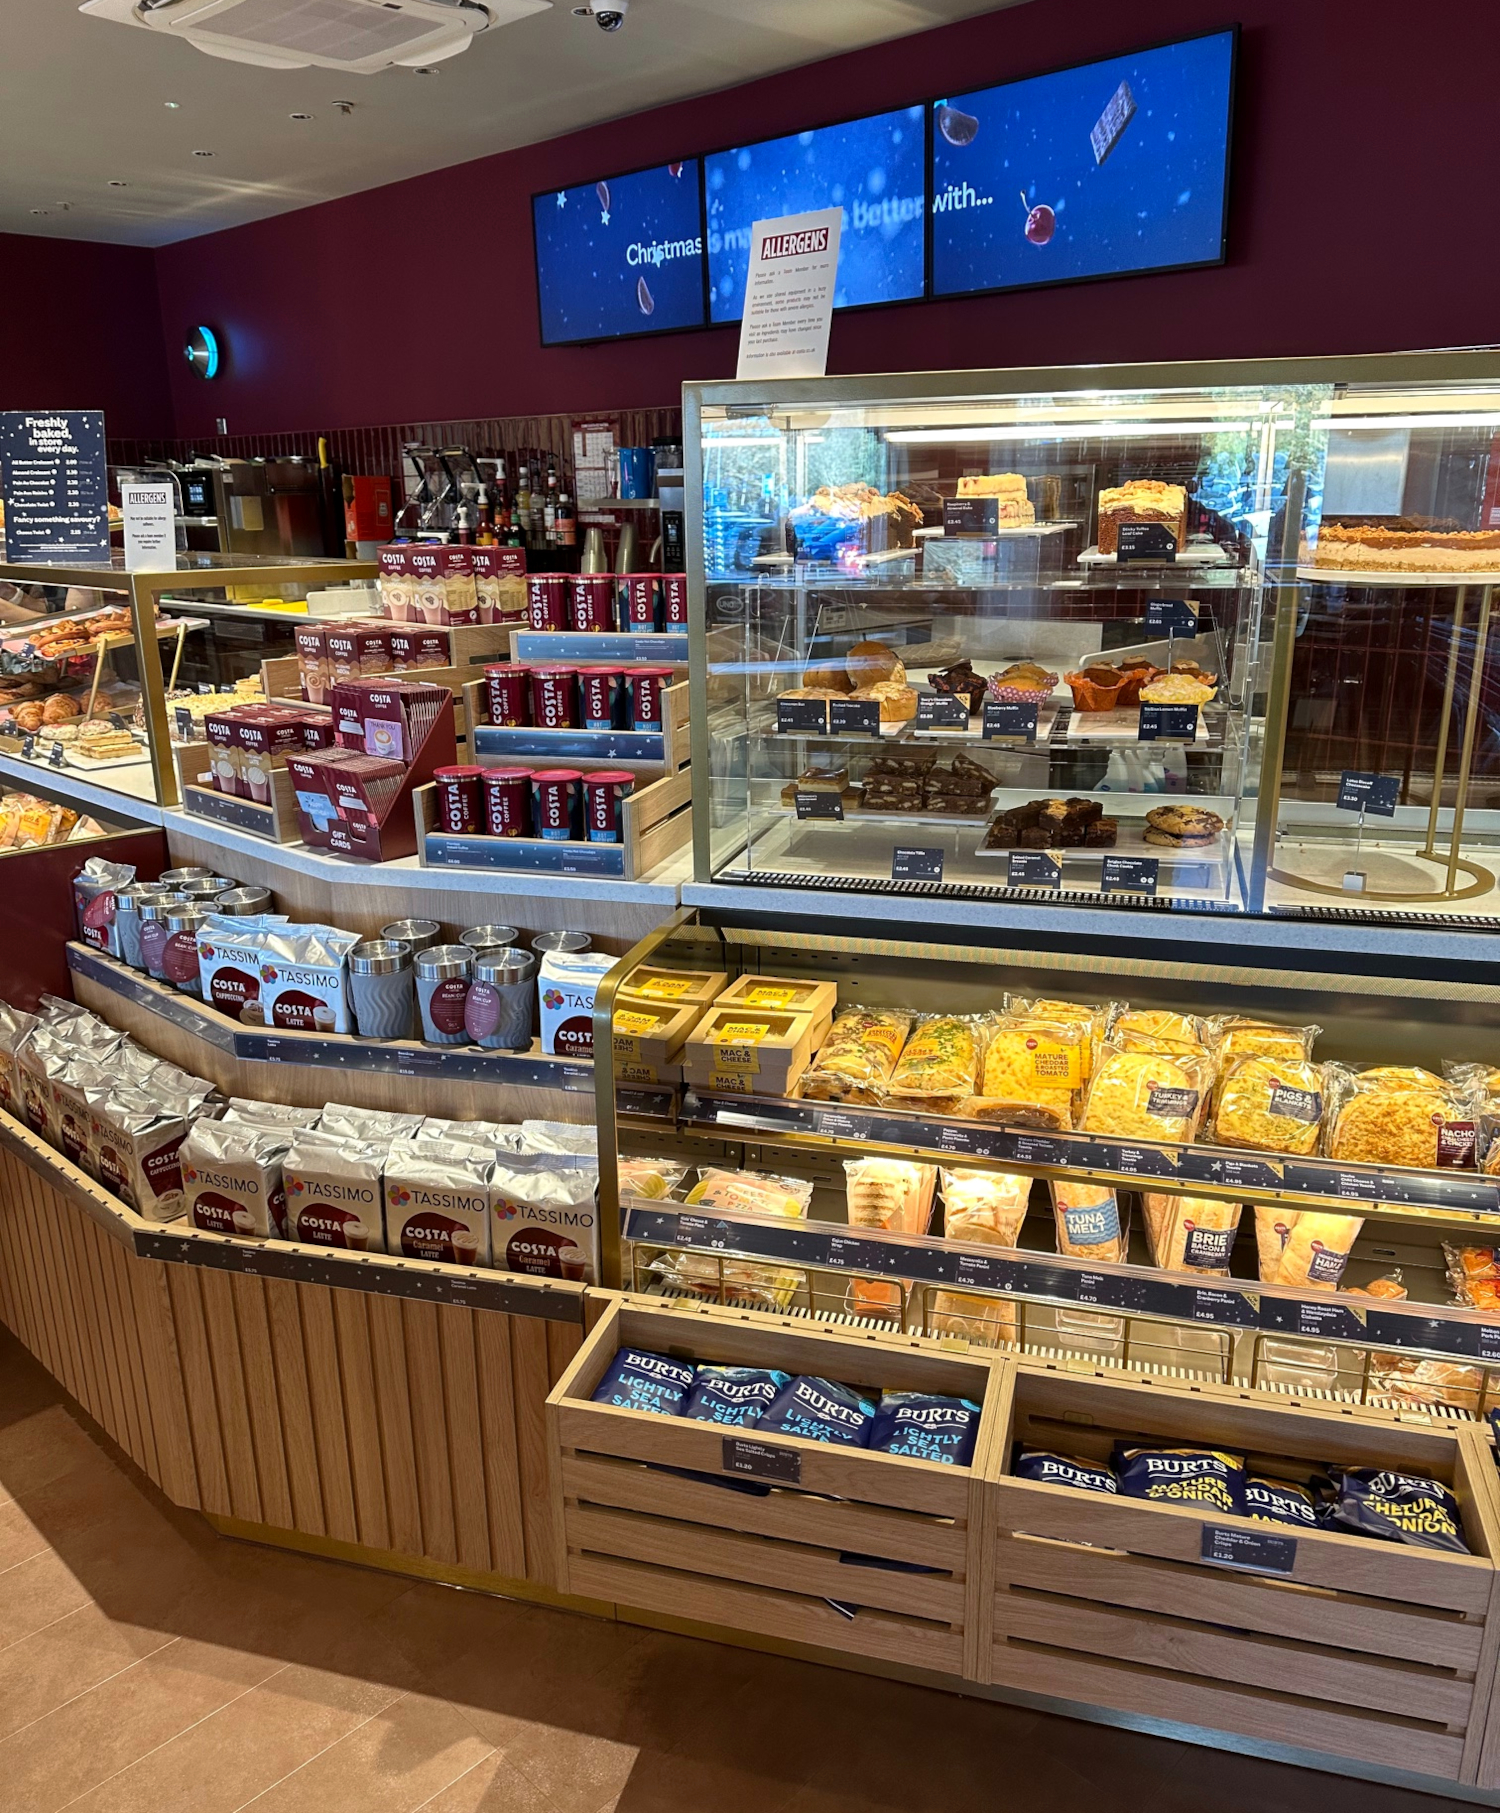 Full display ready to open at Costa coffee shop, Chichester, West Sussex. Photo by A.Howse